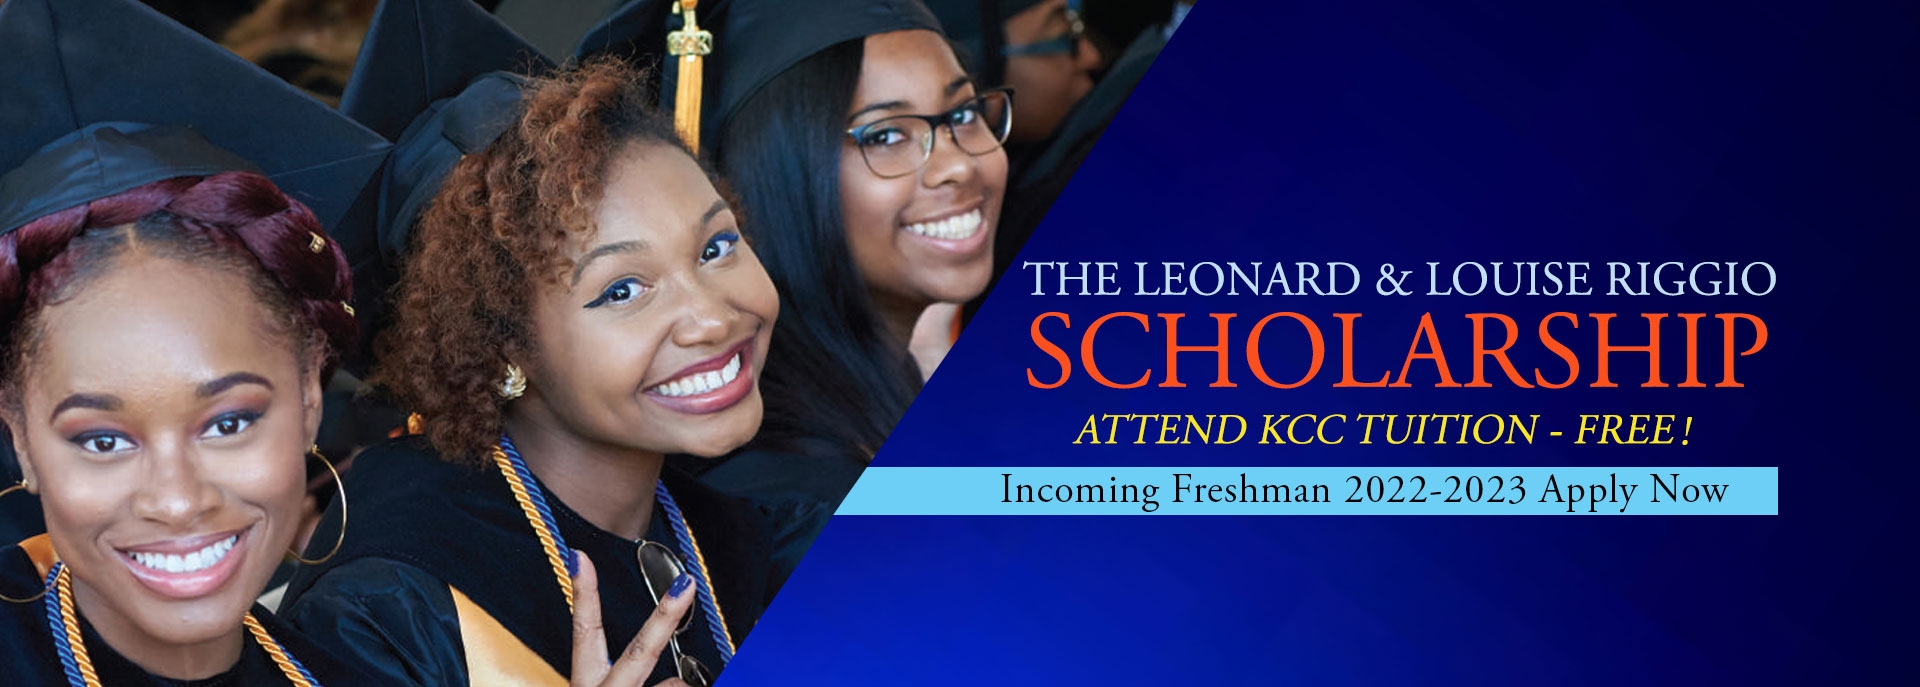 Leonard and Louise Riggio Scholarship: Apply Now, Attend KCC Tuition-Free!